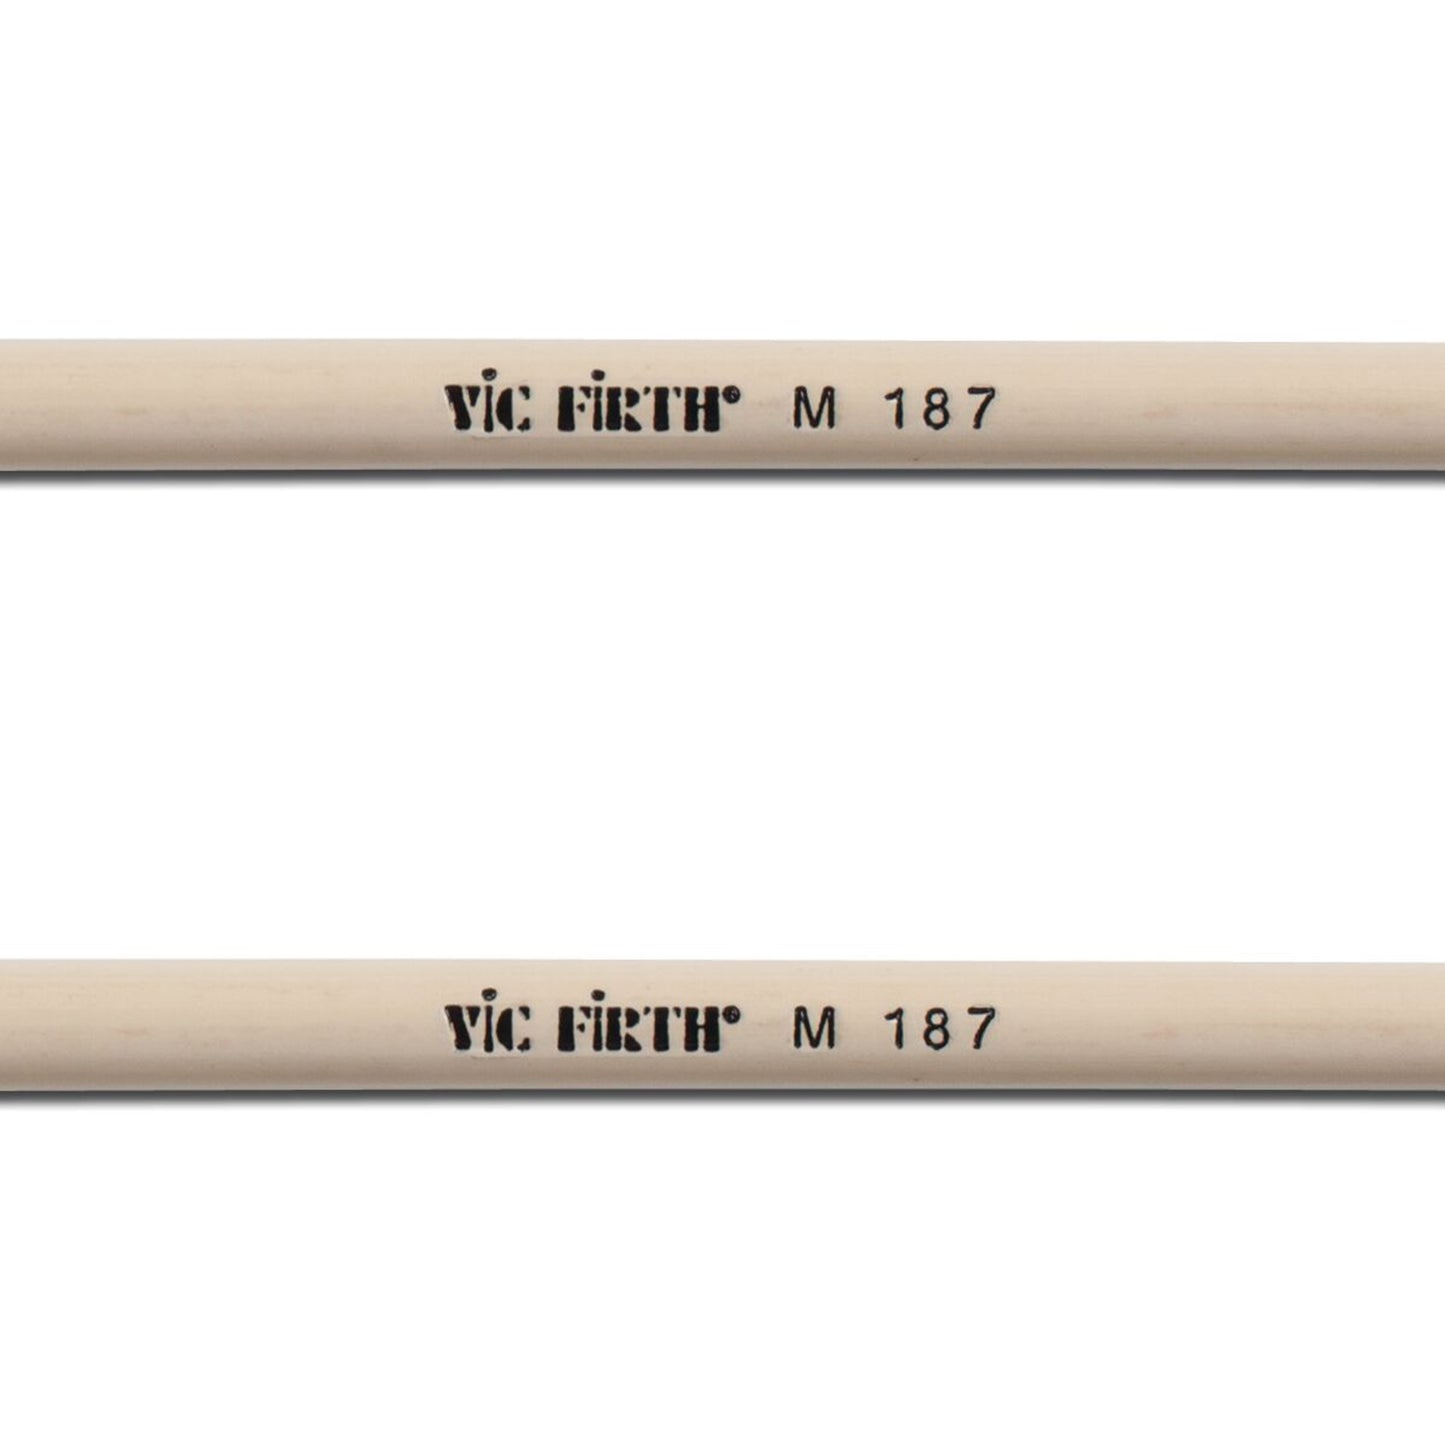 M187 - Corpsmaster Multi-Application Series - Medium Hard, Weighted Rubber Core Mallets